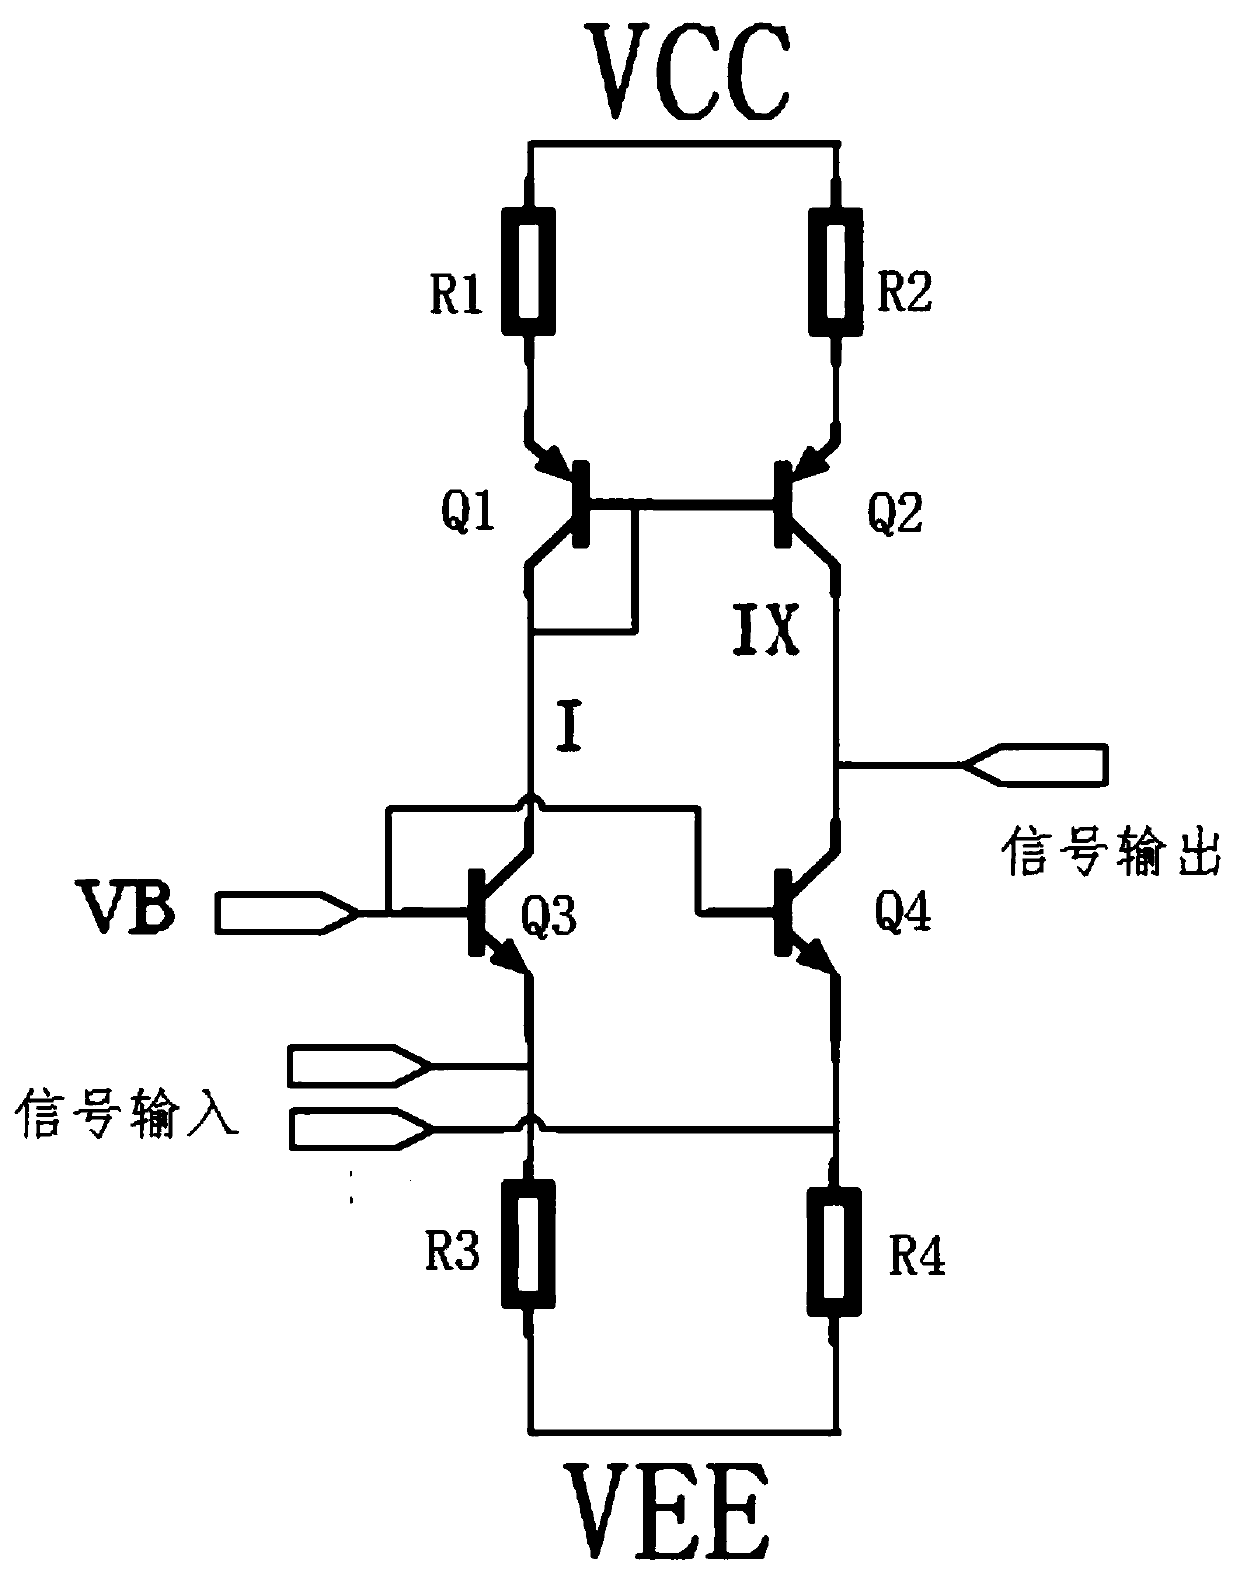 Bipolar process-based integrated circuit with ultralow offset voltage